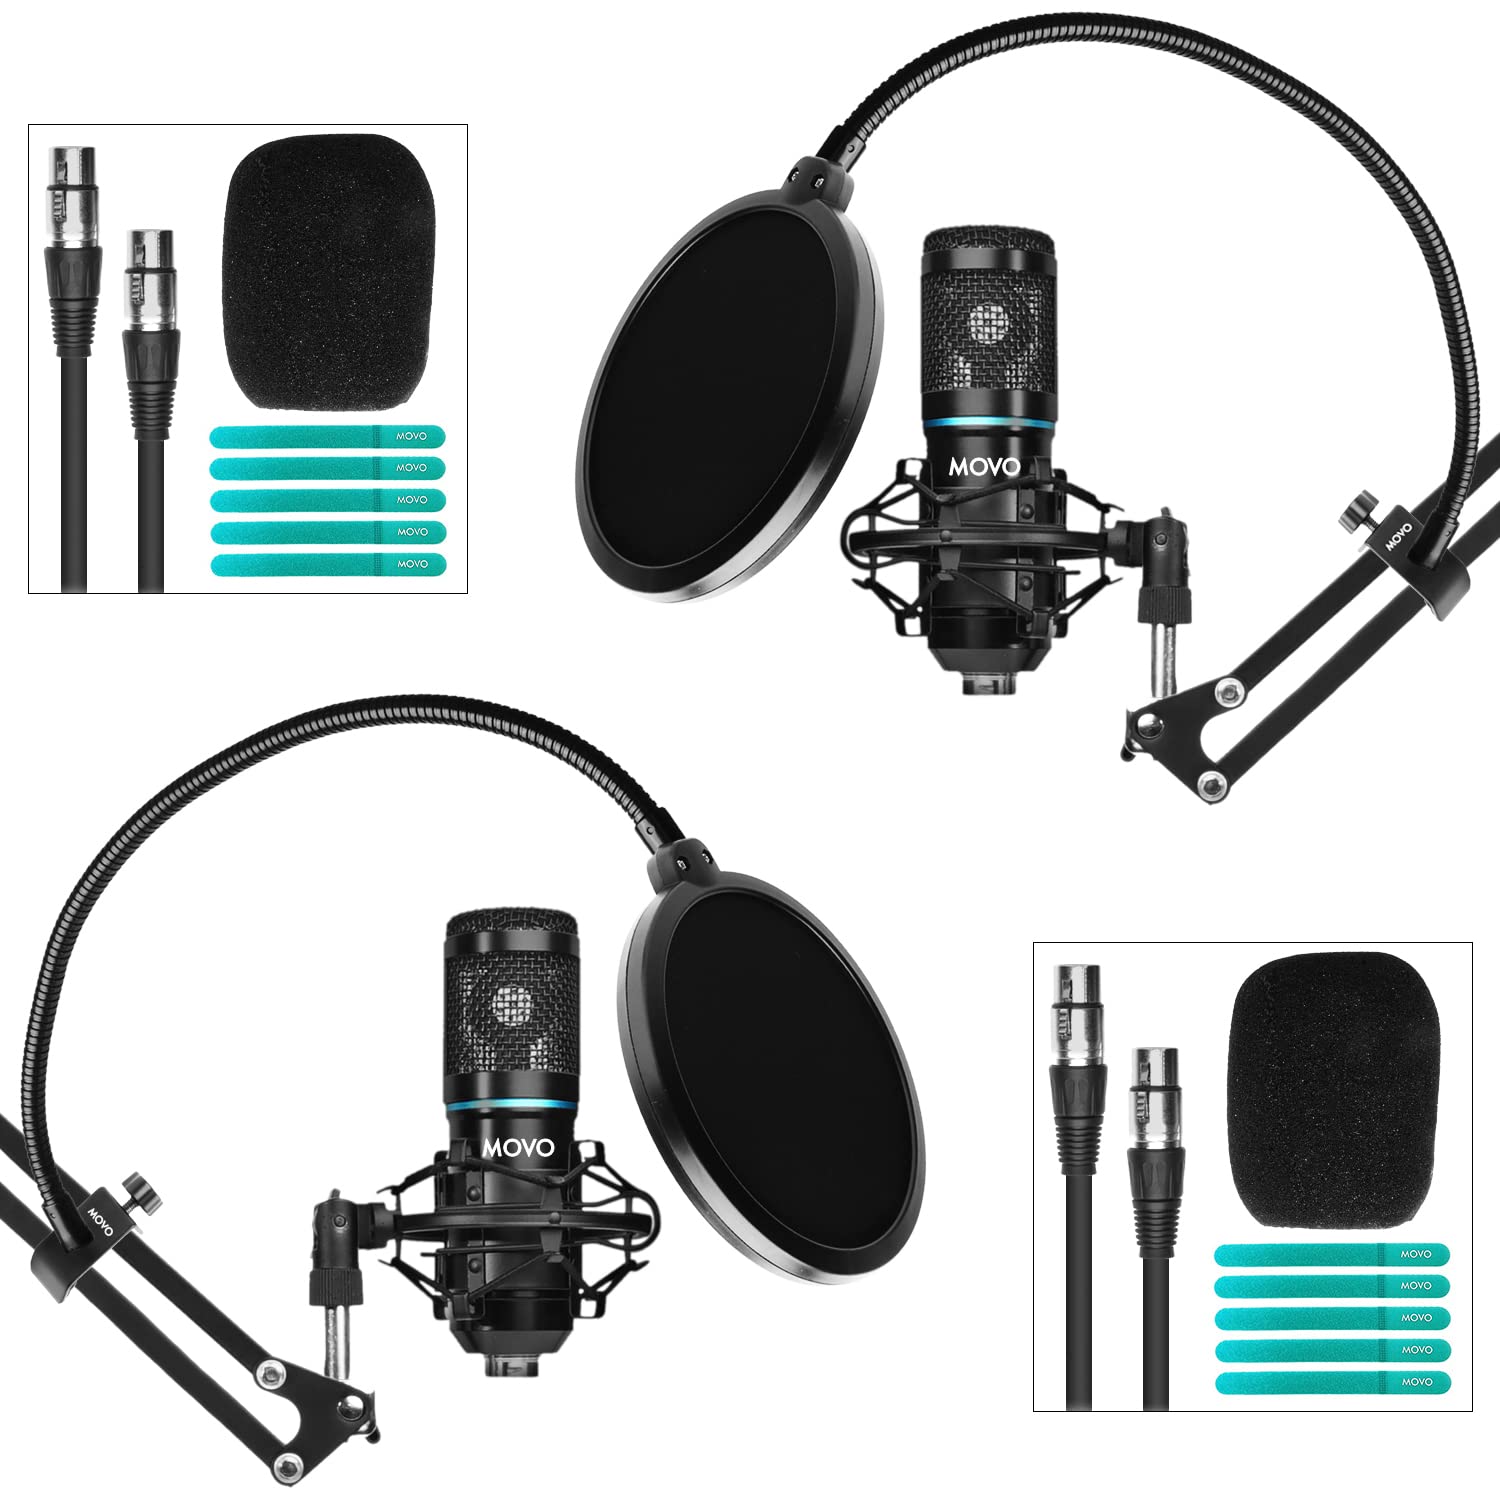 Movo PodPak2A 2-Pack Universal Cardioid Condenser Microphone Kit with Articulating Scissor Arm Mic Stand, Shock Mount, and Gooseneck Pop Filter - Podcast Equipment Set for YouTube, Podcast, Streaming  - Very Good